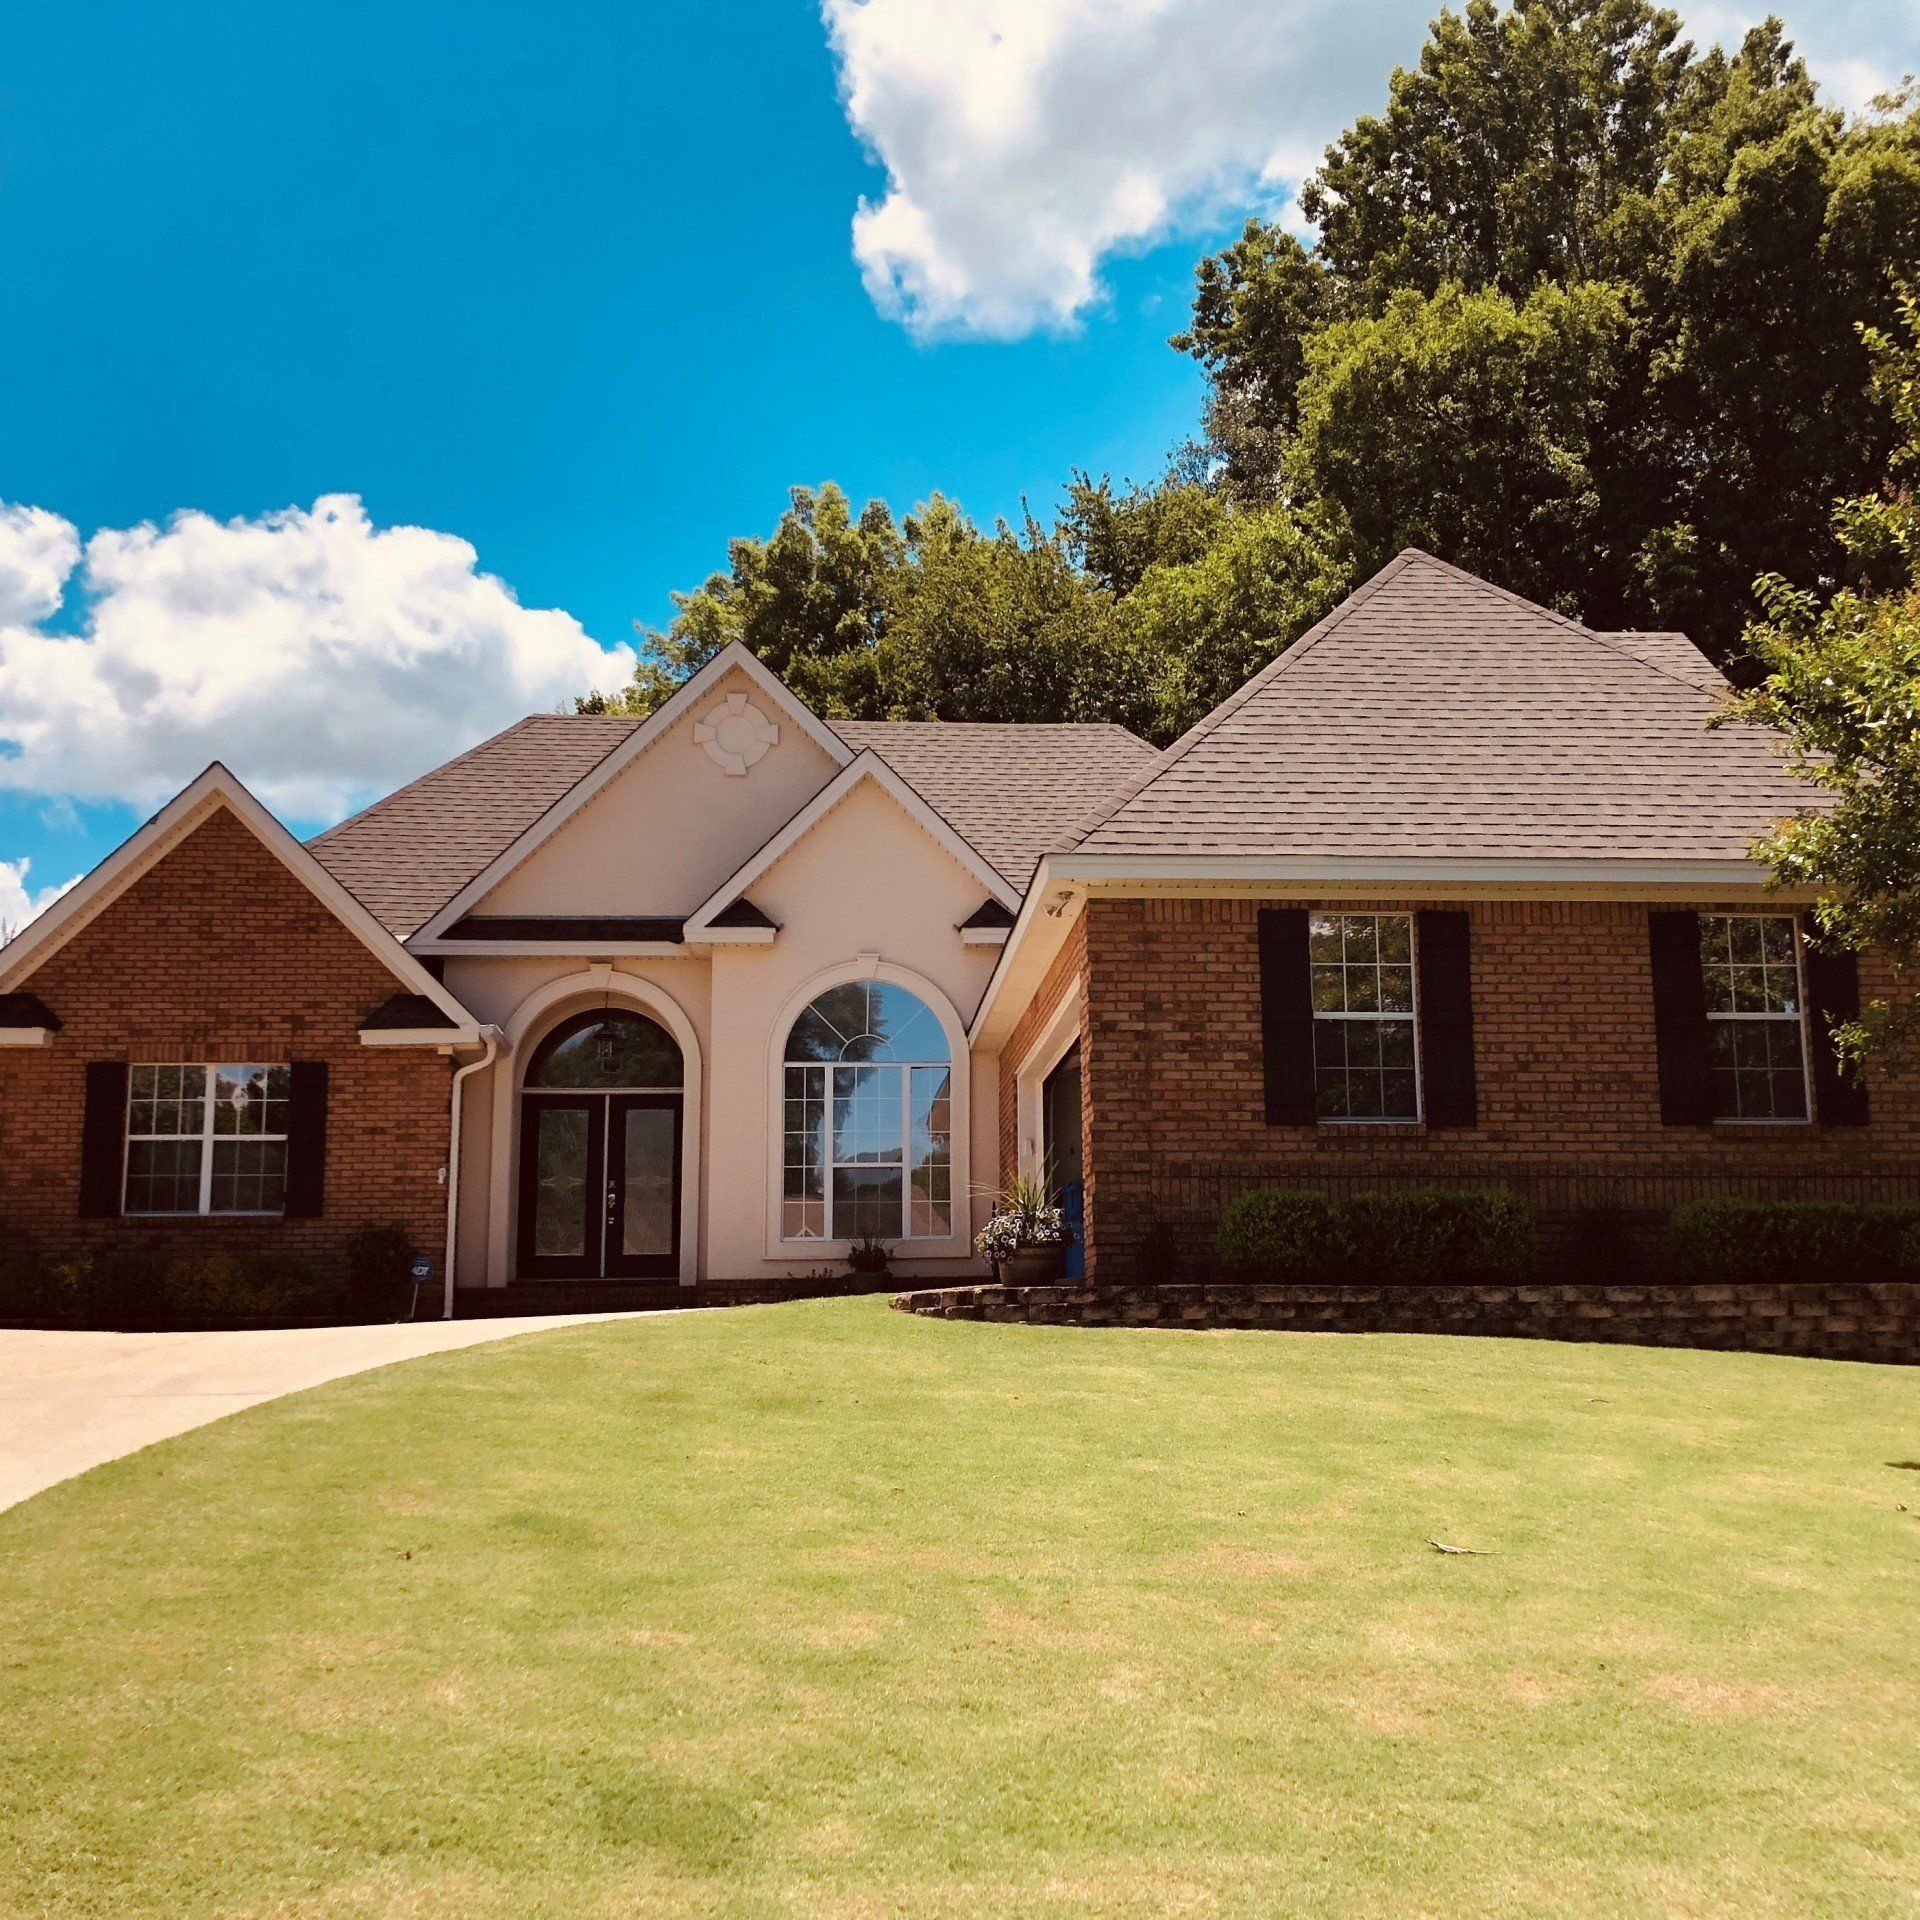 home tinting Service in Prattville AL - Now 85% of the heat has been blocked with SPF Preferred home Tint. Allowing for an even climate and low energy costs in Prattville, AL